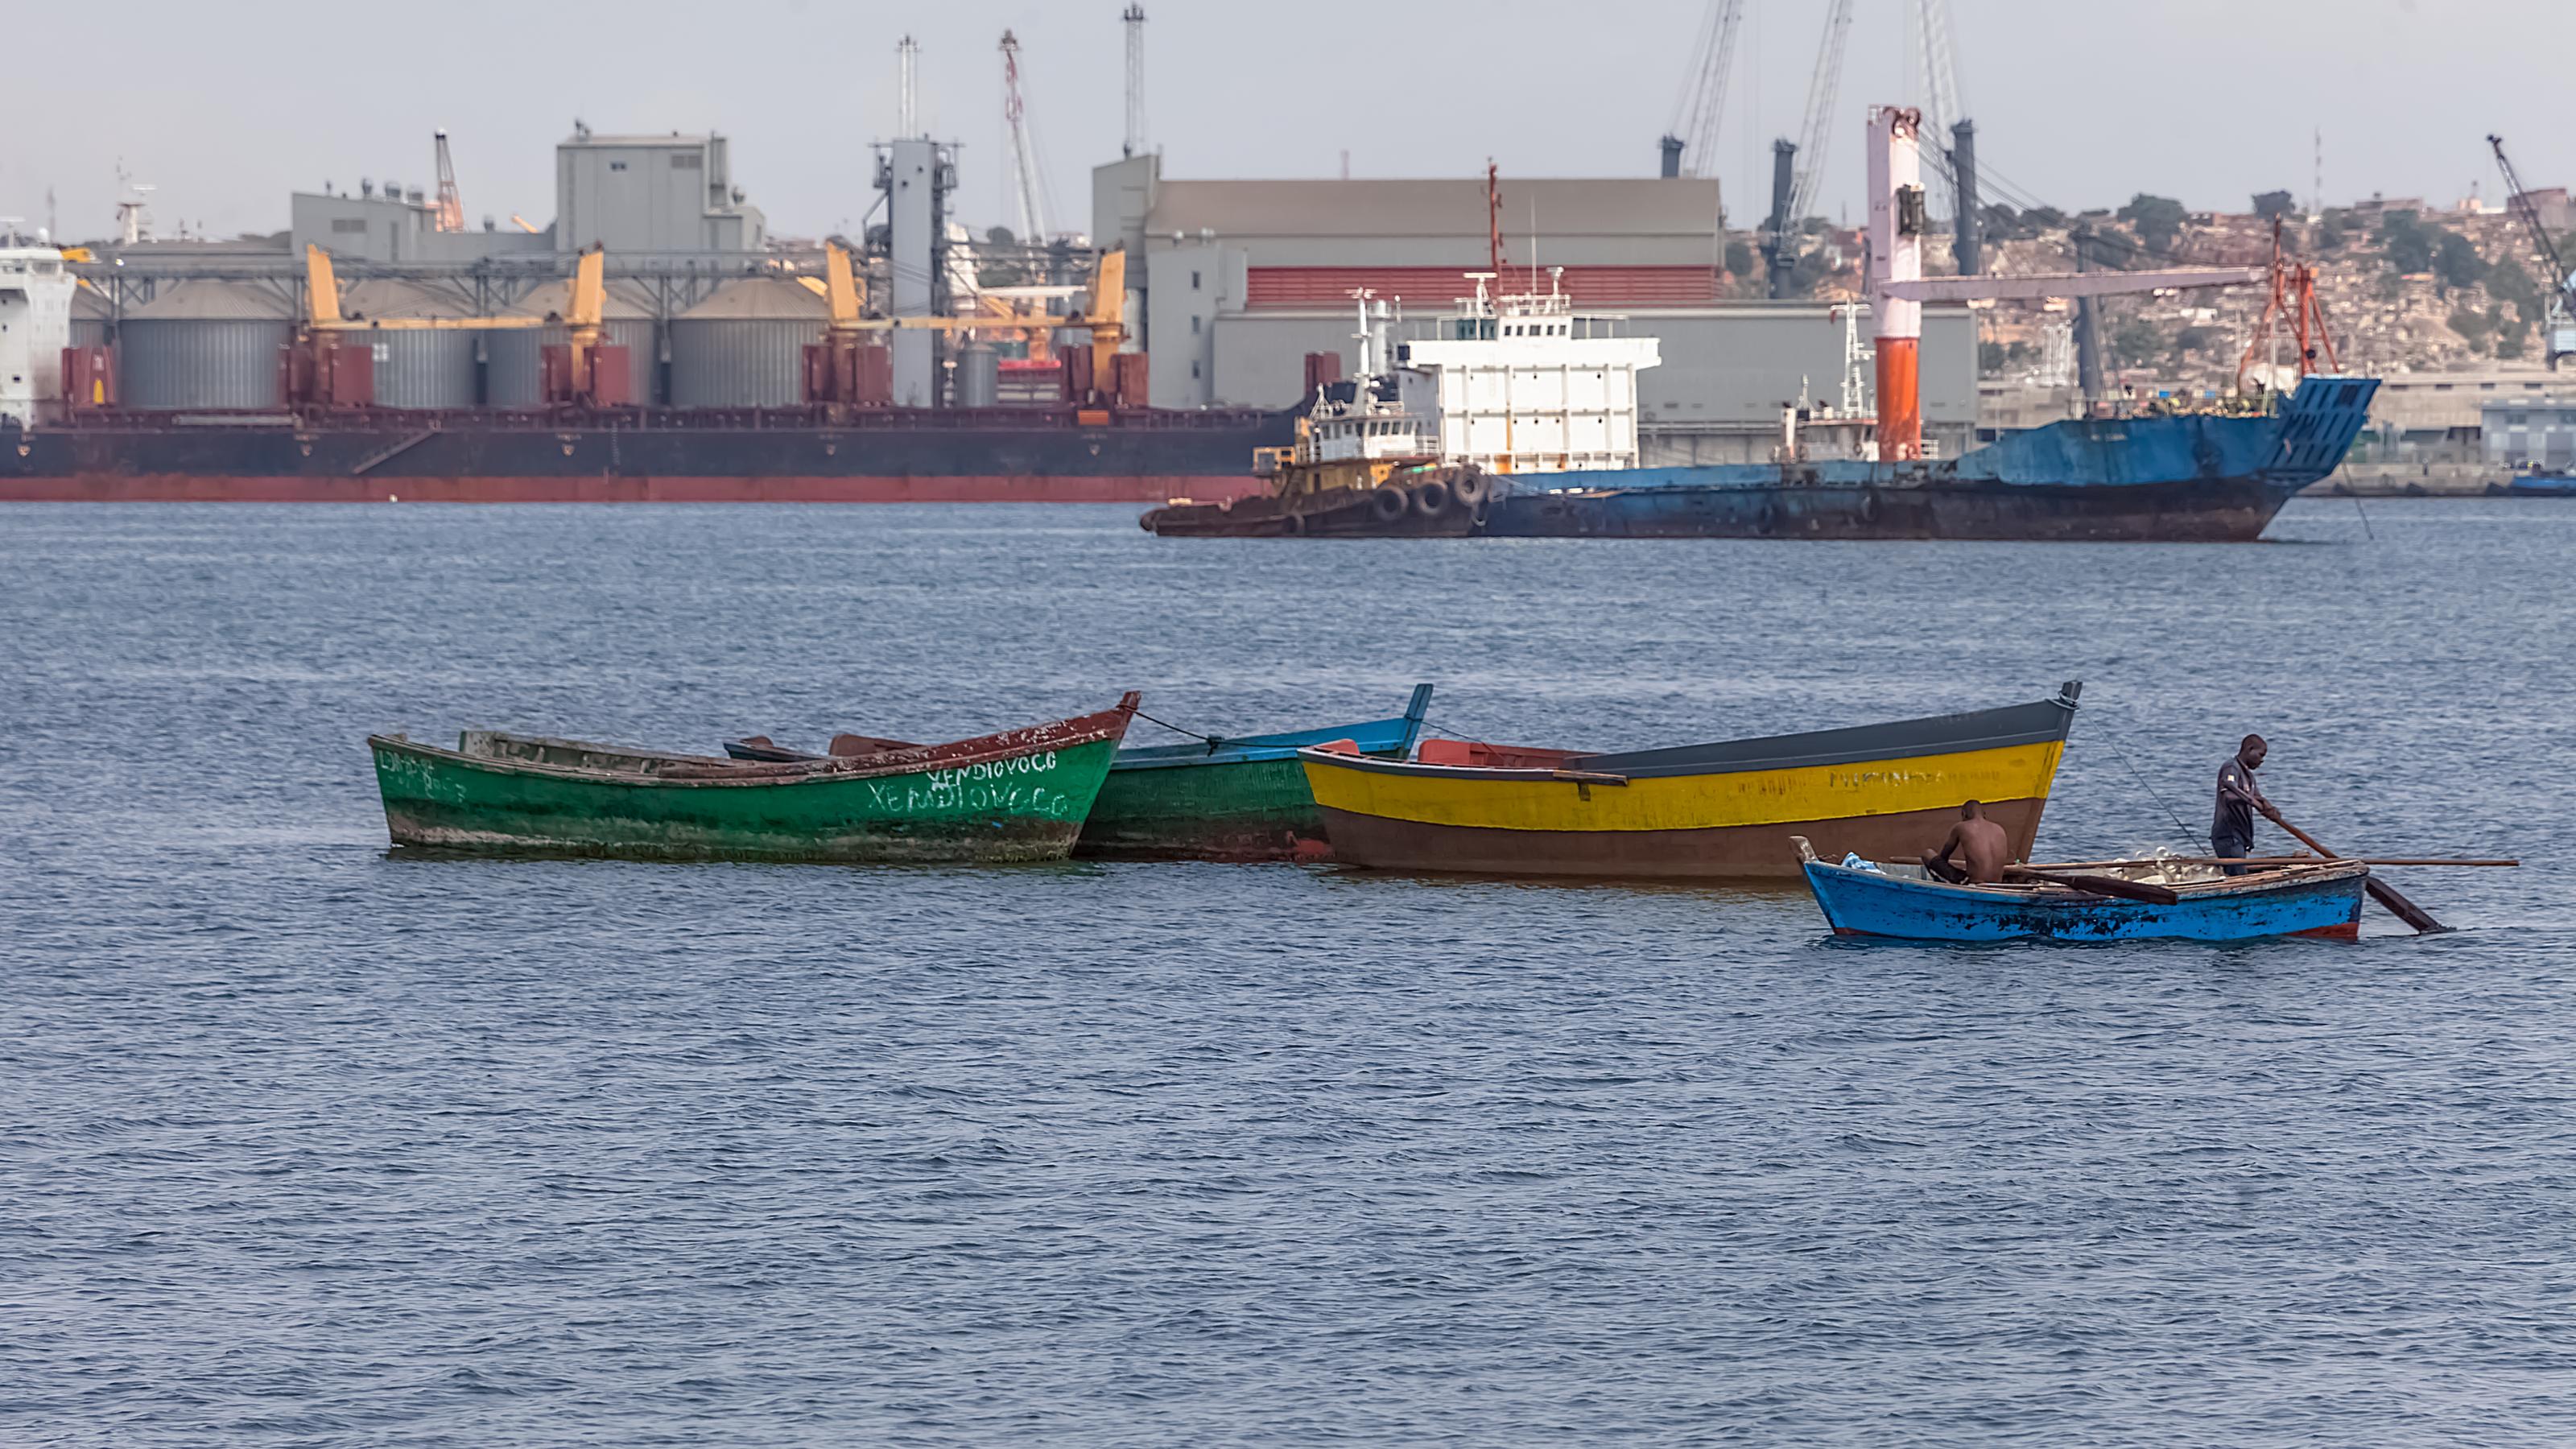 Luanda Angola – 10 13 2021: View of a fishing boats, oil tanker and Port of Luanda, port logistics center with containers as background, Luanda, Angola